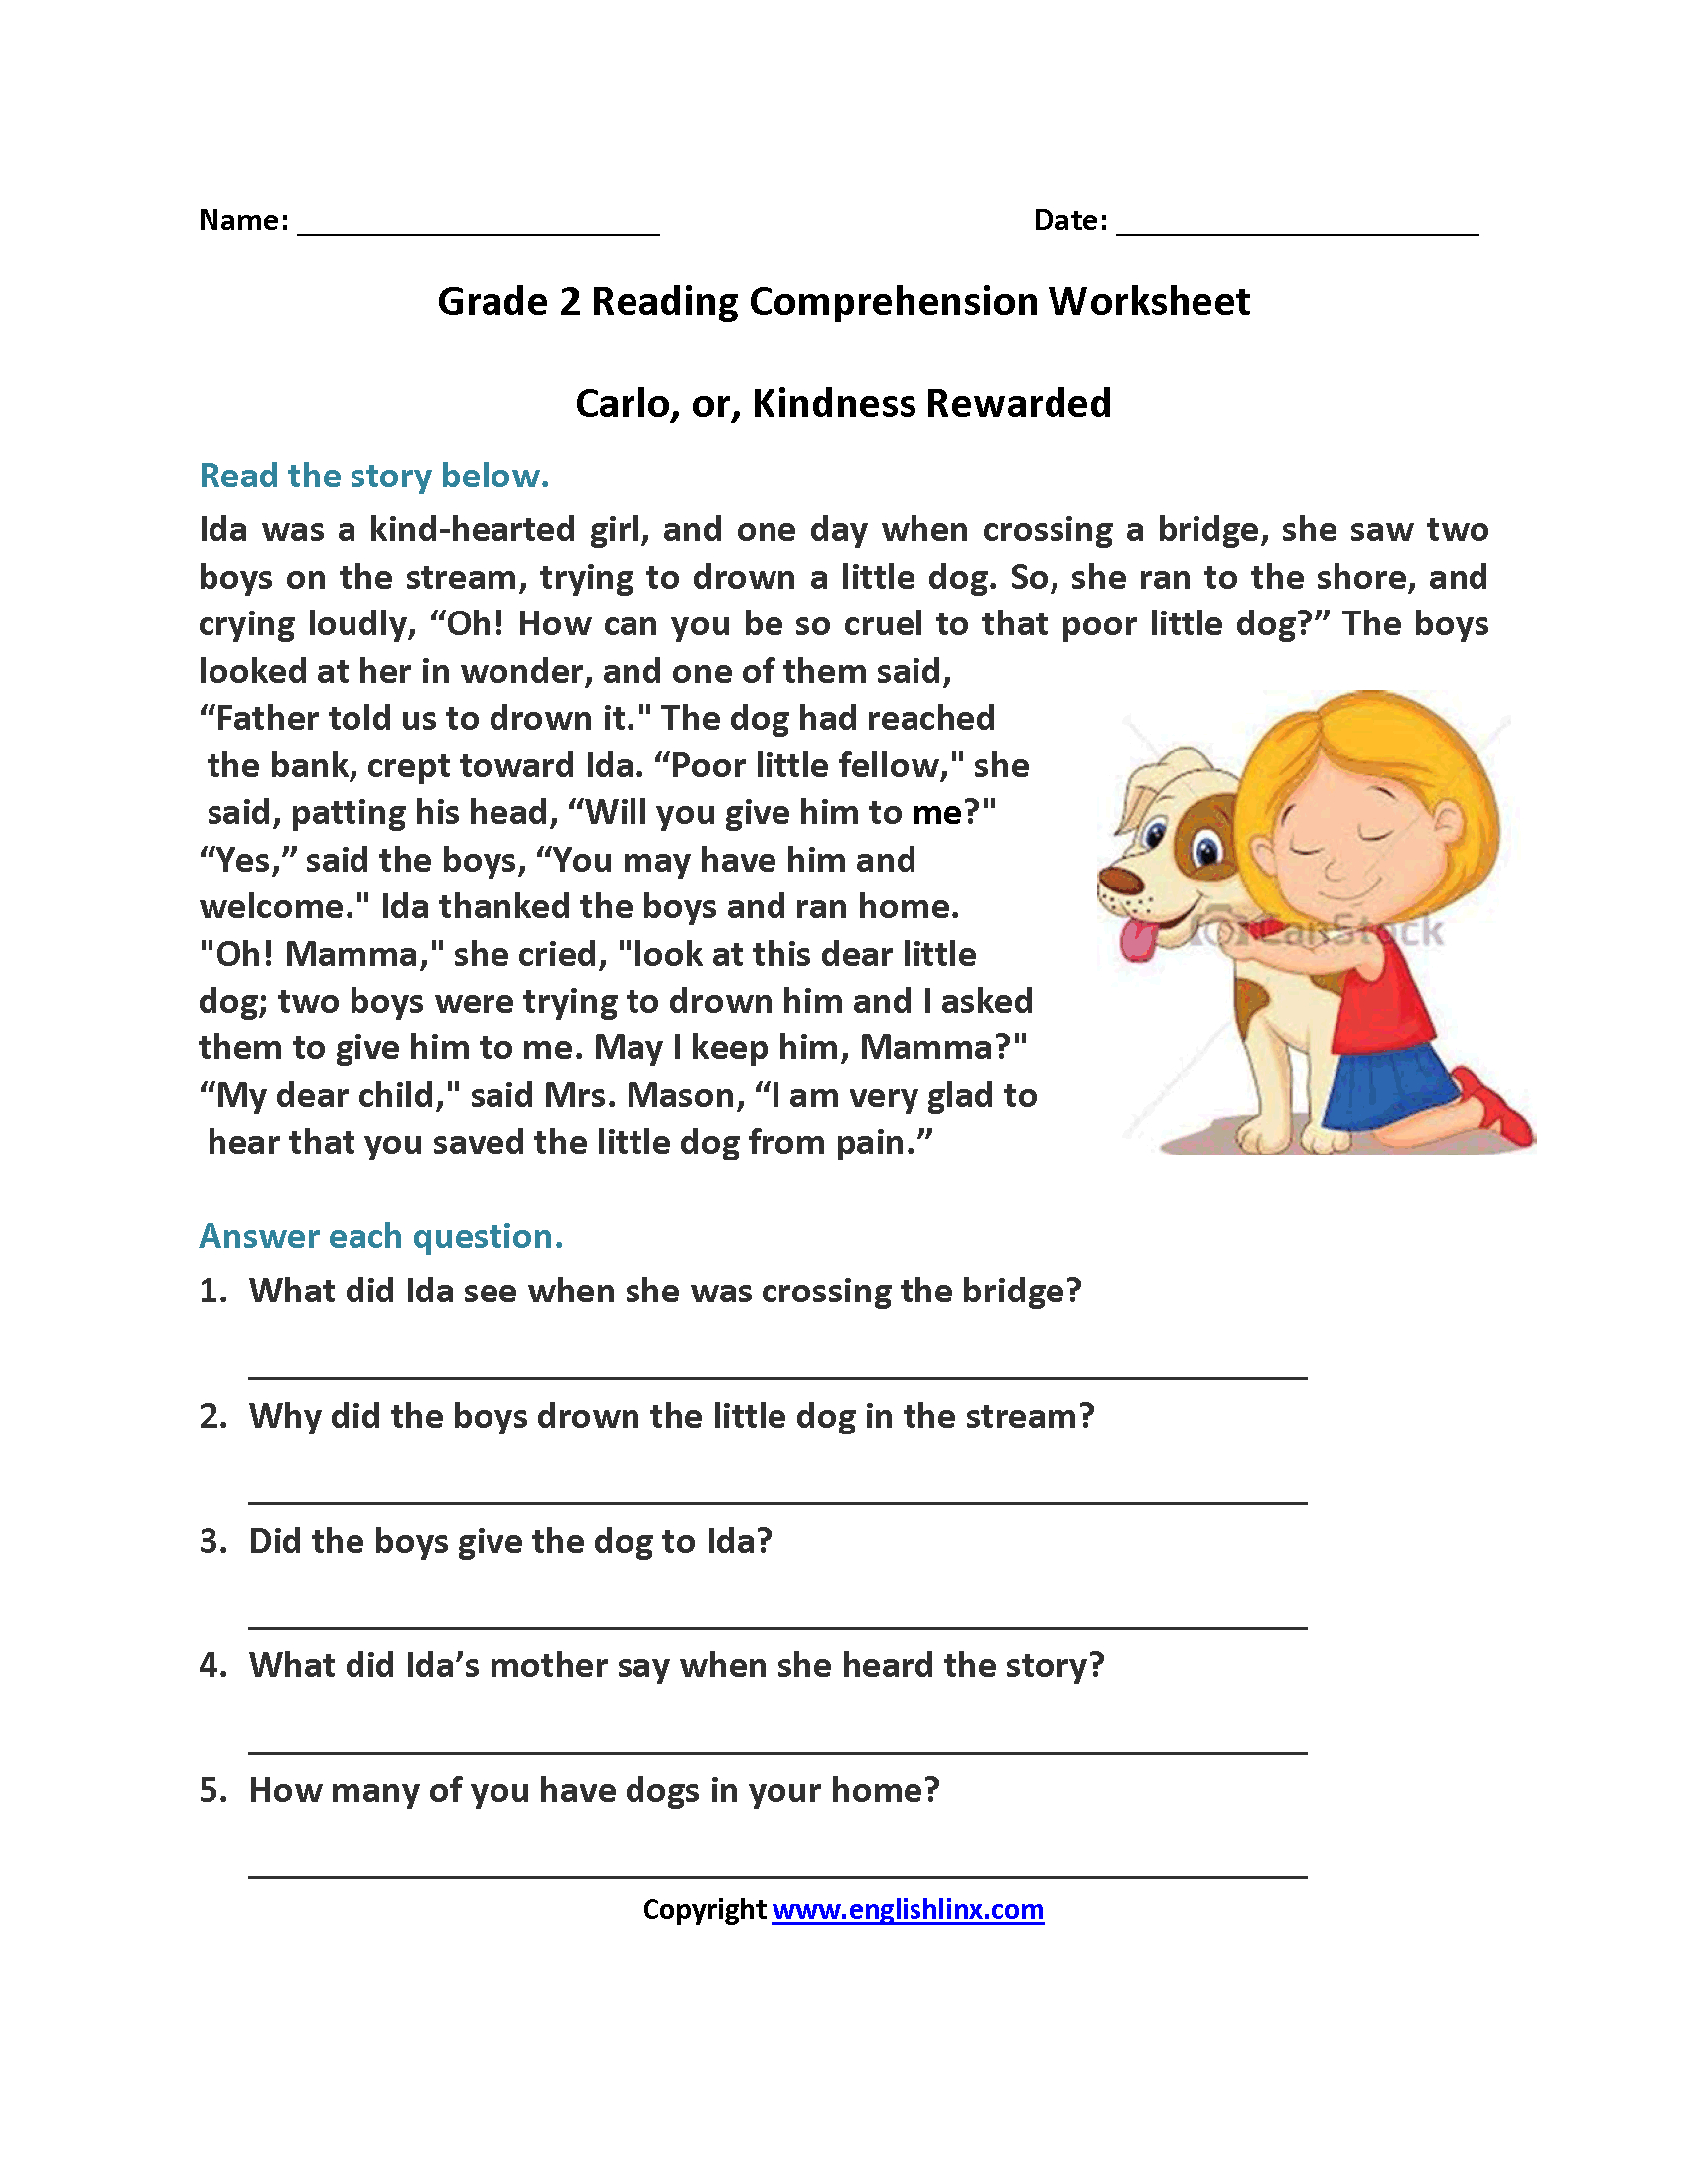 Carlo Or Kindness Rewarded Second Grade Reading Worksheets | Reading | Free Printable Comprehension Worksheets For 5Th Grade